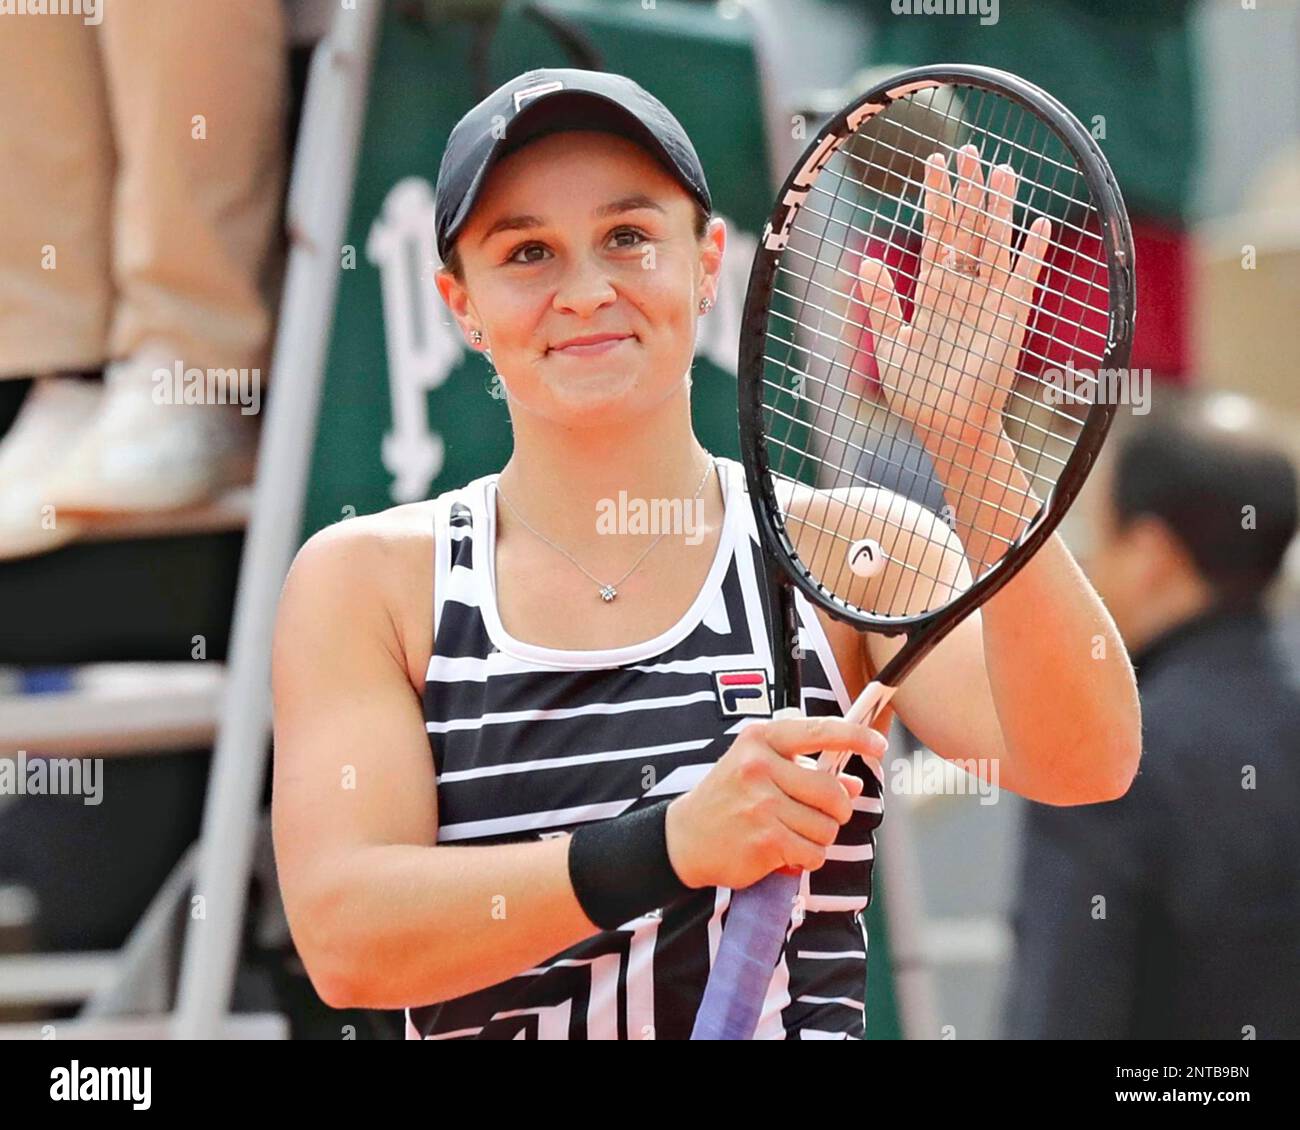 FILE: Ashleigh BARTY of Australia celebrates after winning the women's  singles of the French Open tennis tournament in Paris, France on June 8,  2019. BARTY is ranked No. 1 in the world